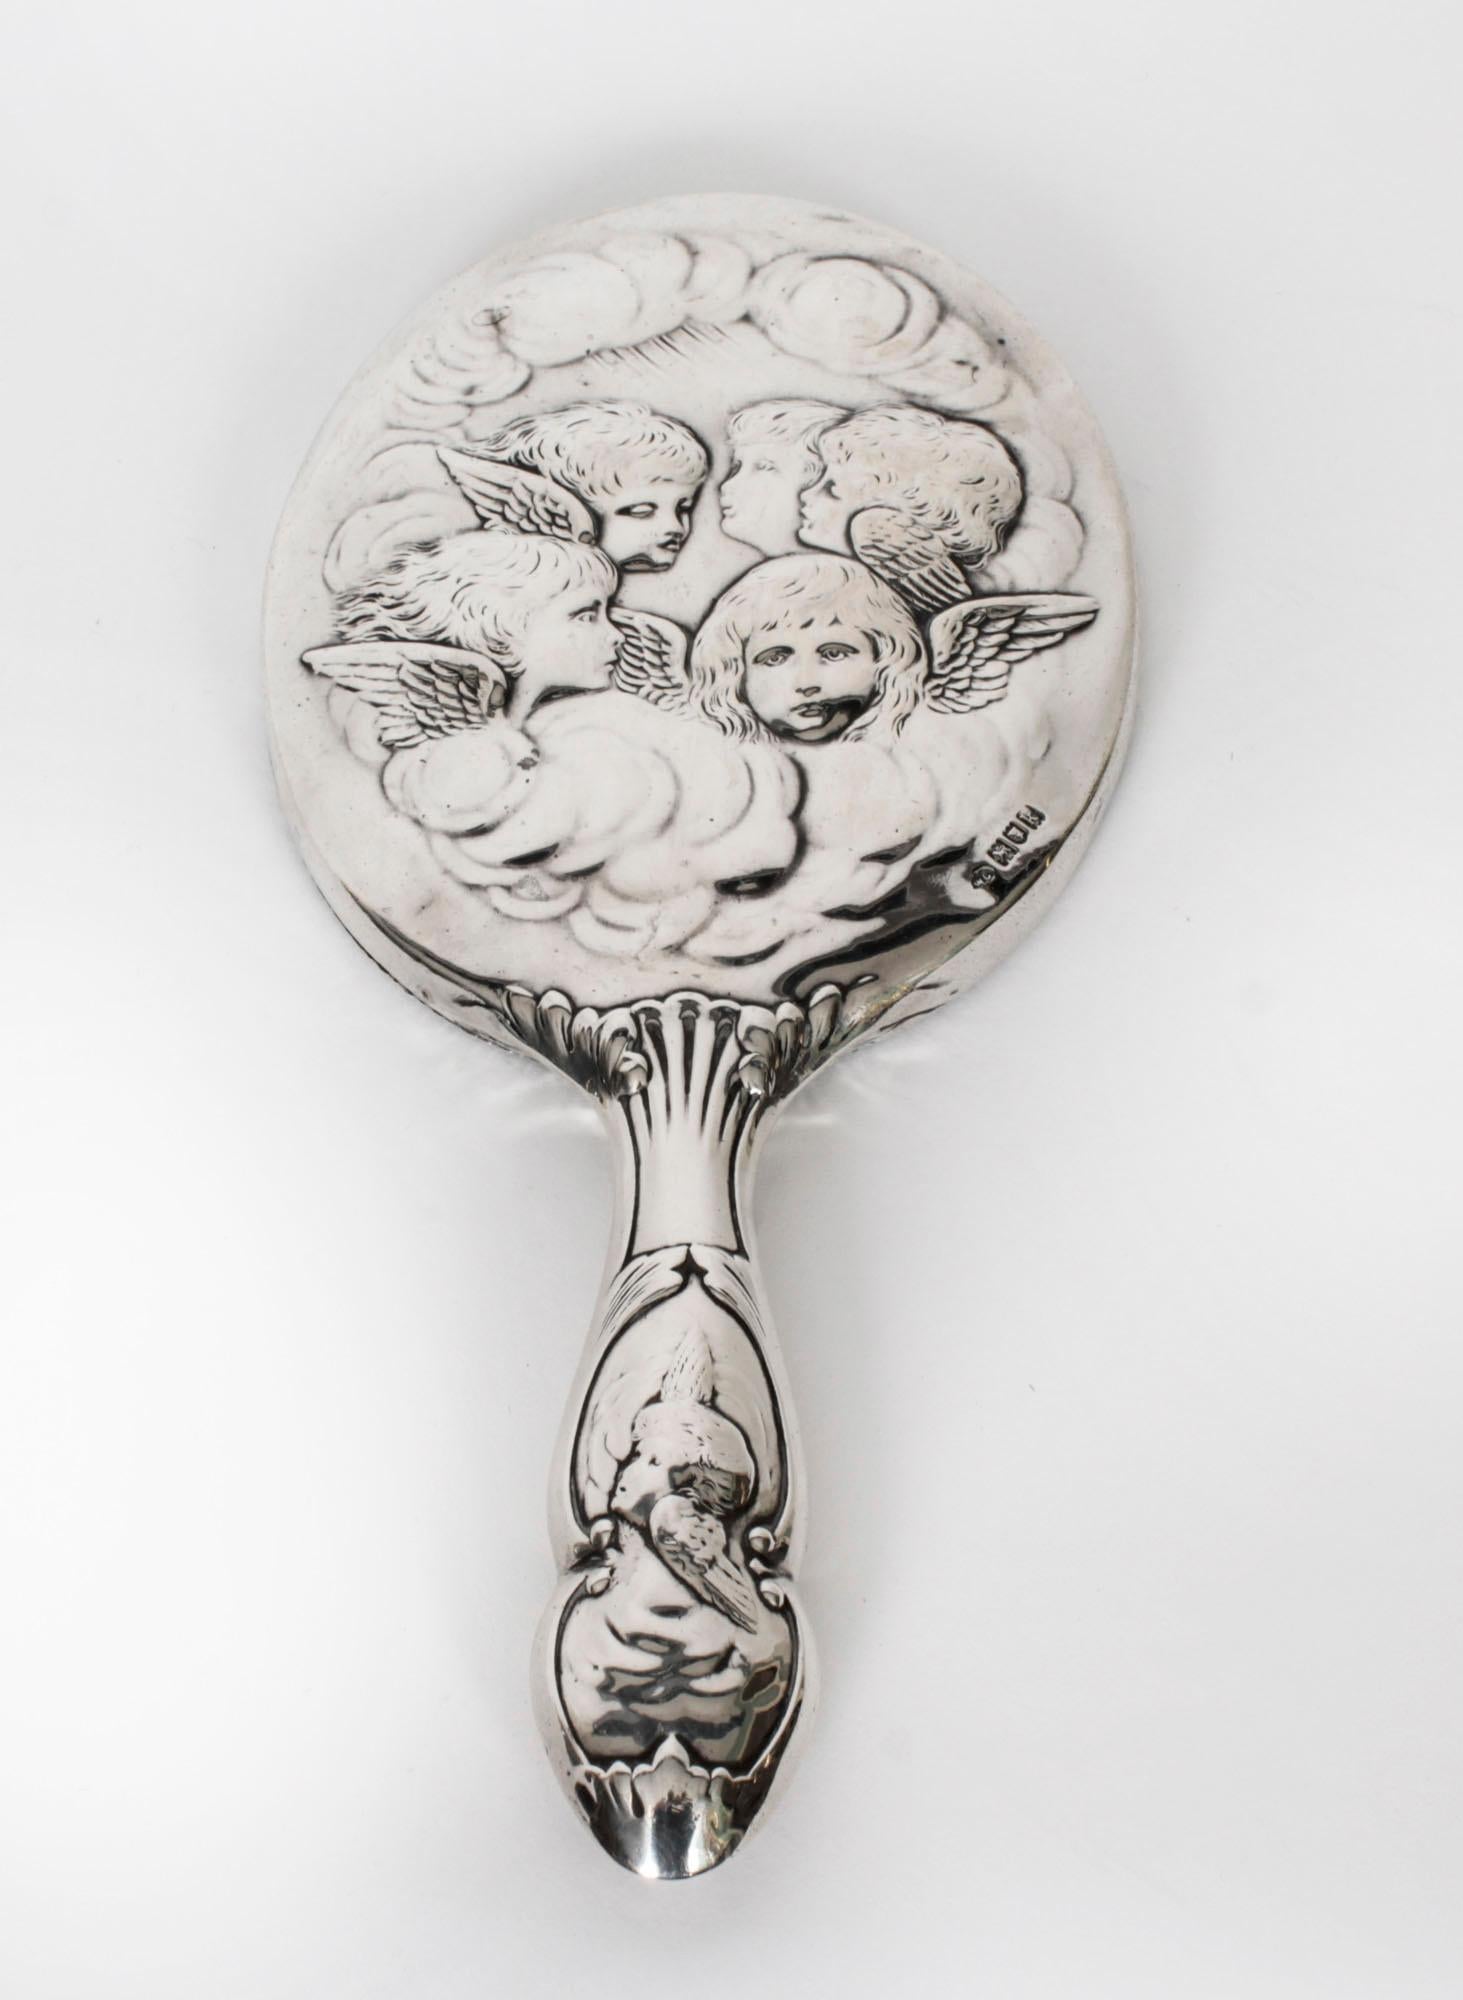 This is a stunning English antique silver hand mirror with hallmarks for London 1905 and the makers mark of the renowned silversmith William Comyns and Sons.
 
The mirror features oval bevelled glass with a beaded rim and is decorated with repousse